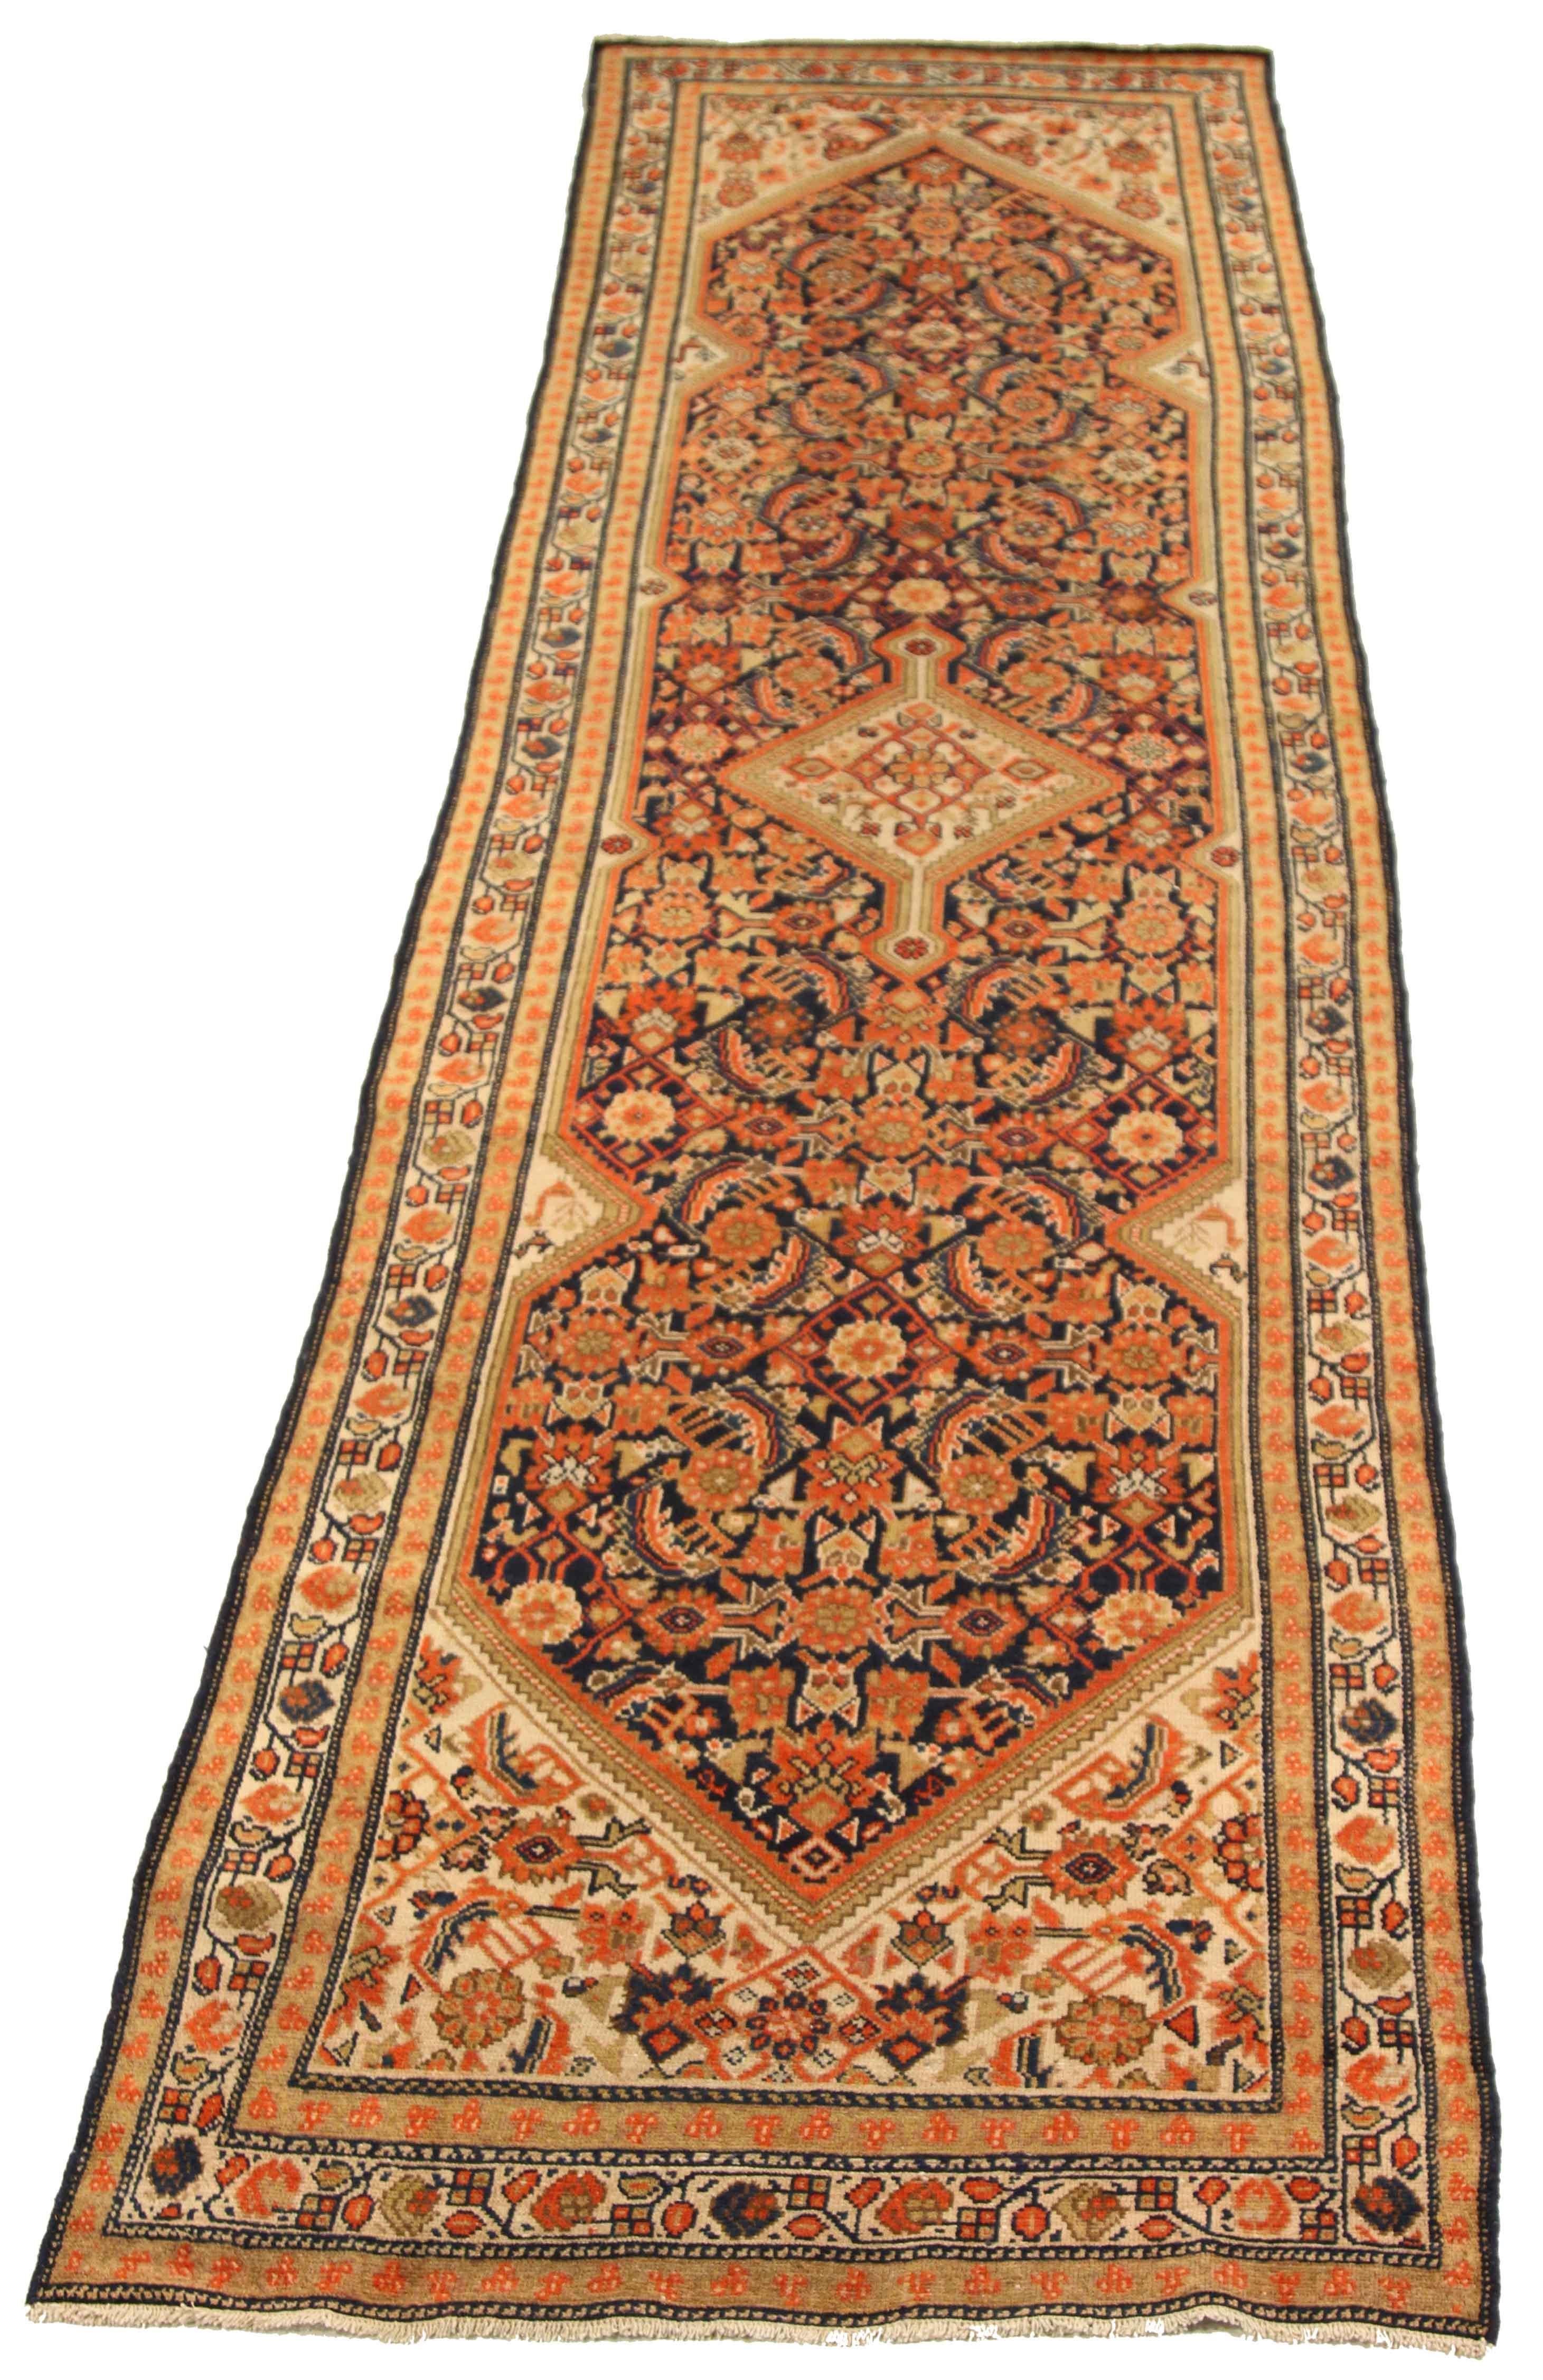 Antique Persian runner rug handwoven from the finest sheep’s wool and colored with all-natural vegetable dyes that are safe for humans and pets. It’s a traditional Malayer design featuring floral details in navy blue and orange over an ivory center